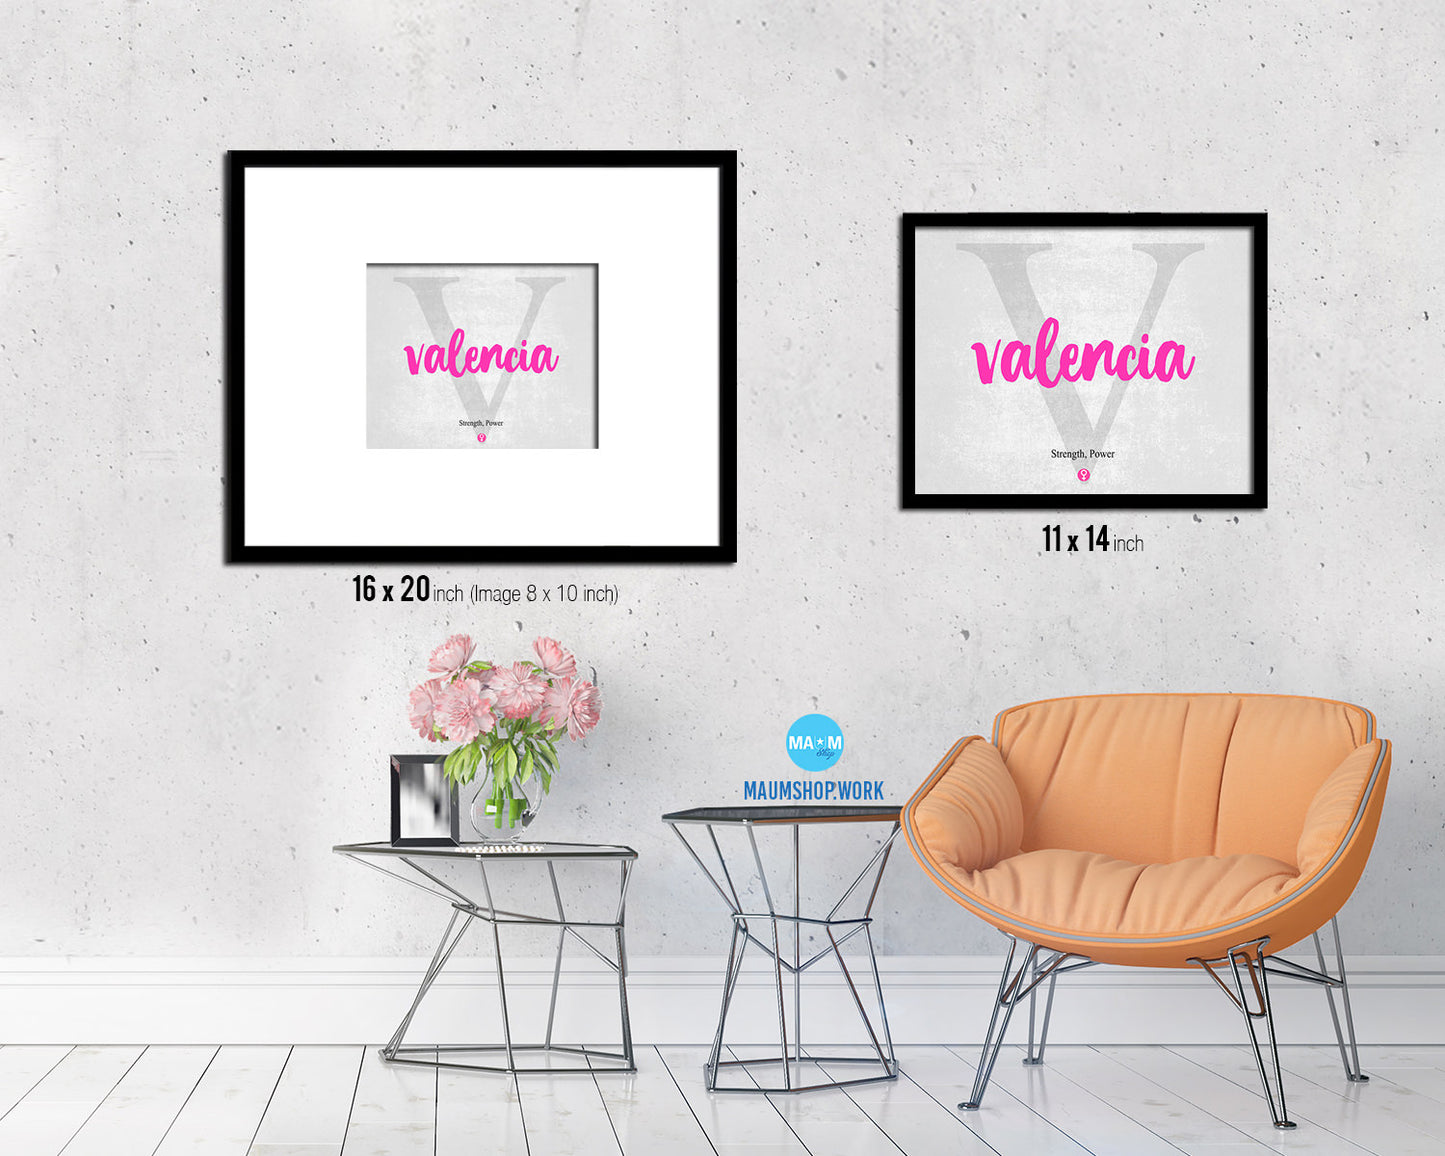 Valencia Personalized Biblical Name Plate Art Framed Print Kids Baby Room Wall Decor Gifts